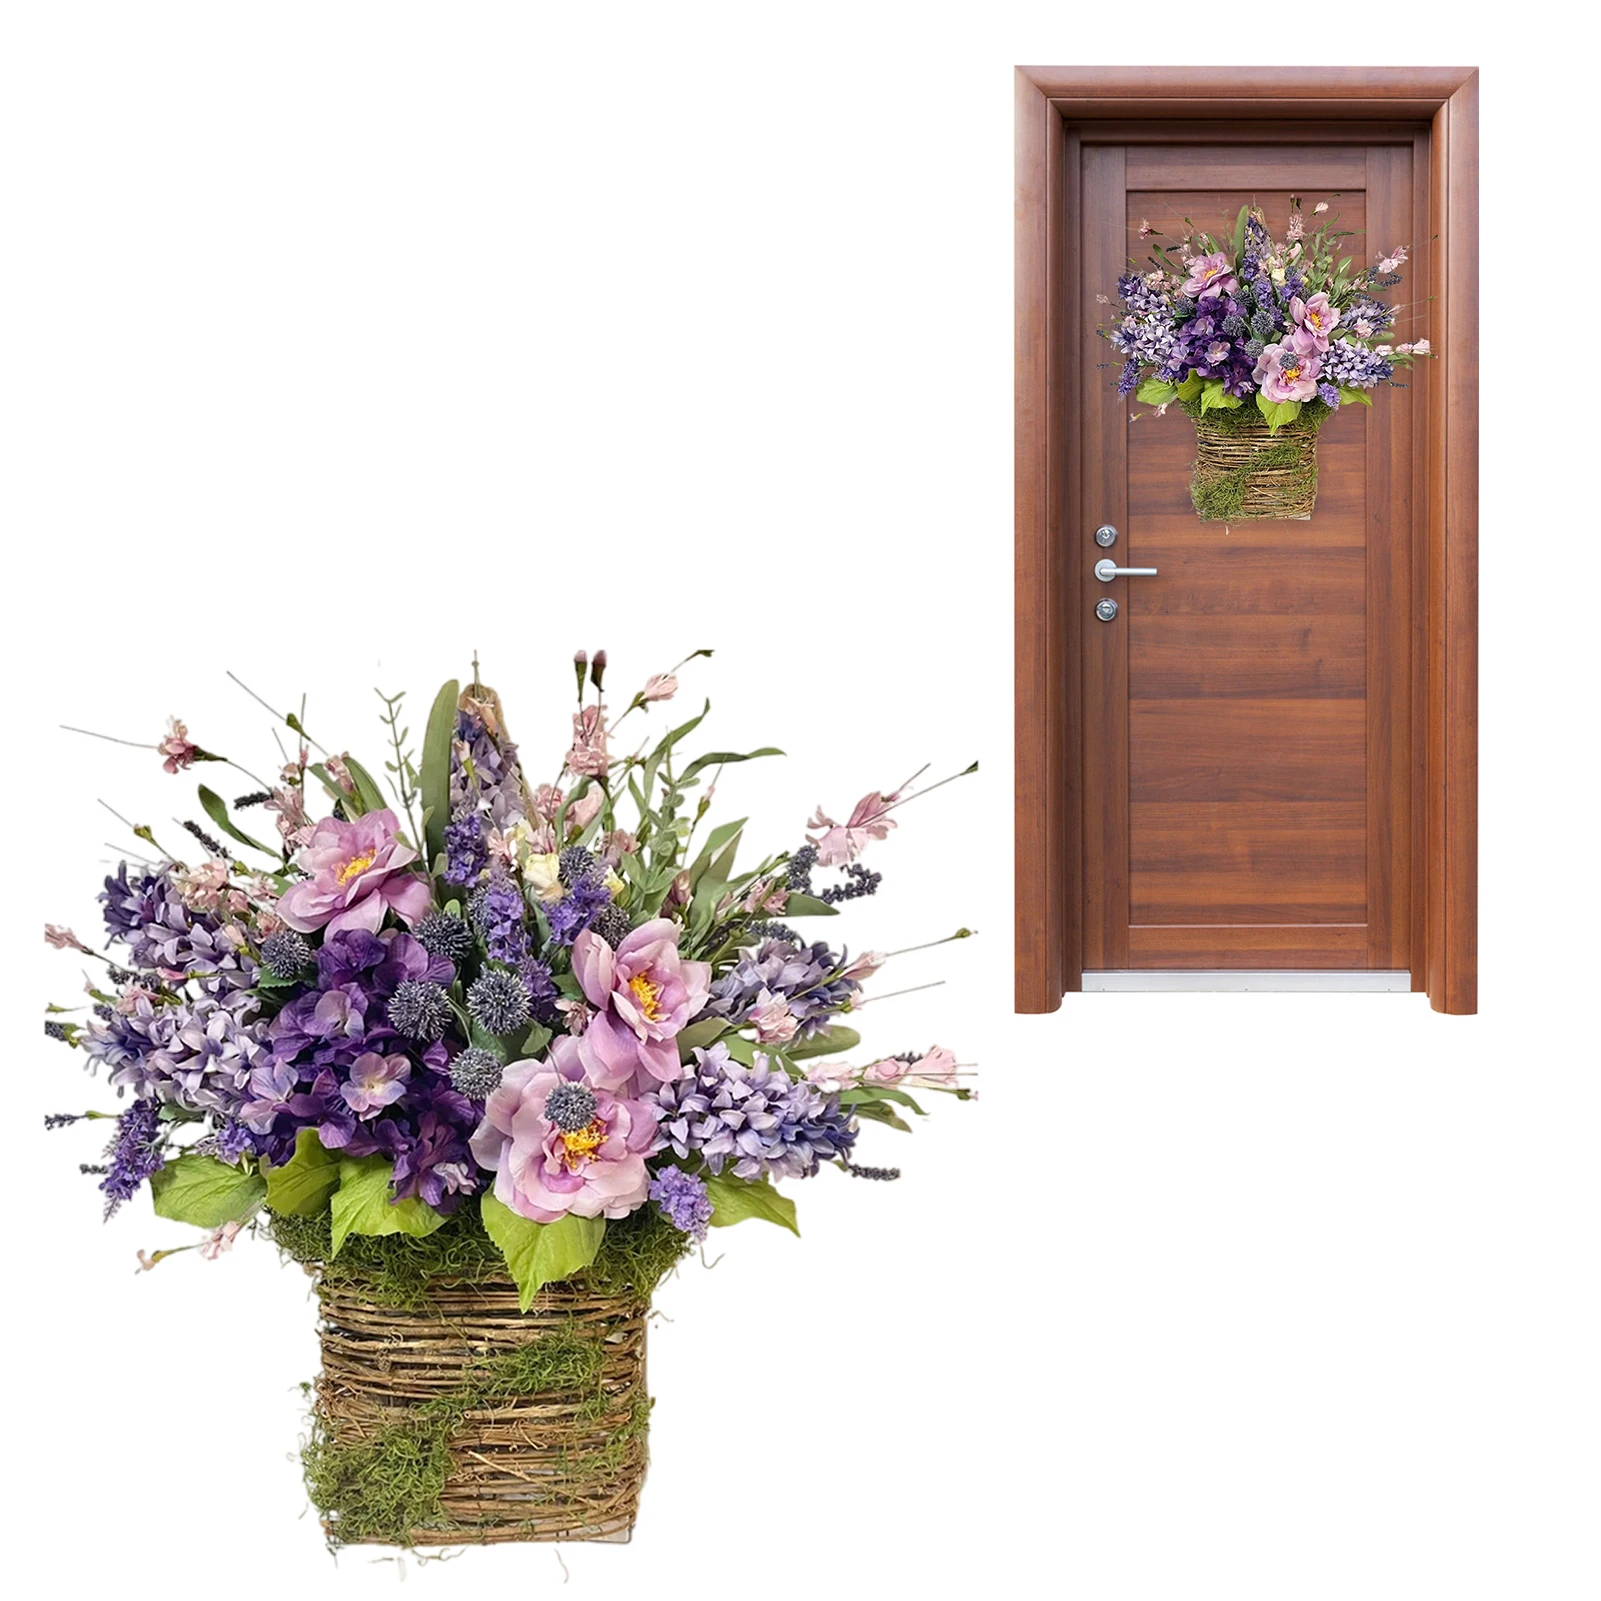 

Lavender Wreaths For Front Door Artificial Flower Lavender With Baskets Spring Wreath Purple Artificial Flower Wreaths For